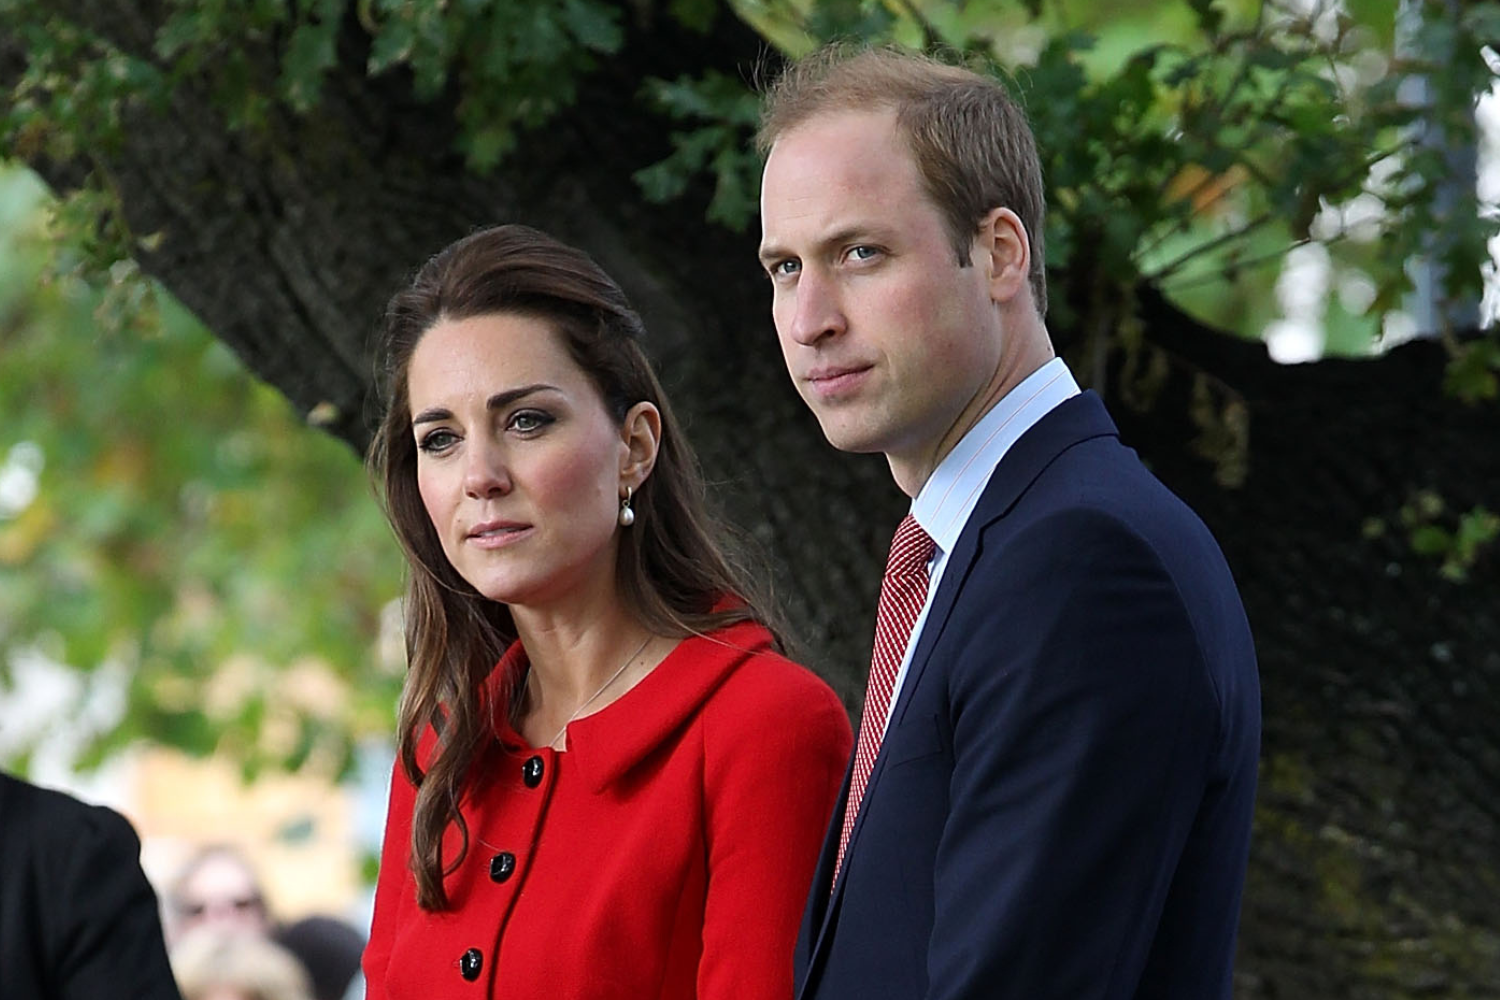 Prince William and Kate Middleton Embarrassing Mishap Caught on Camera